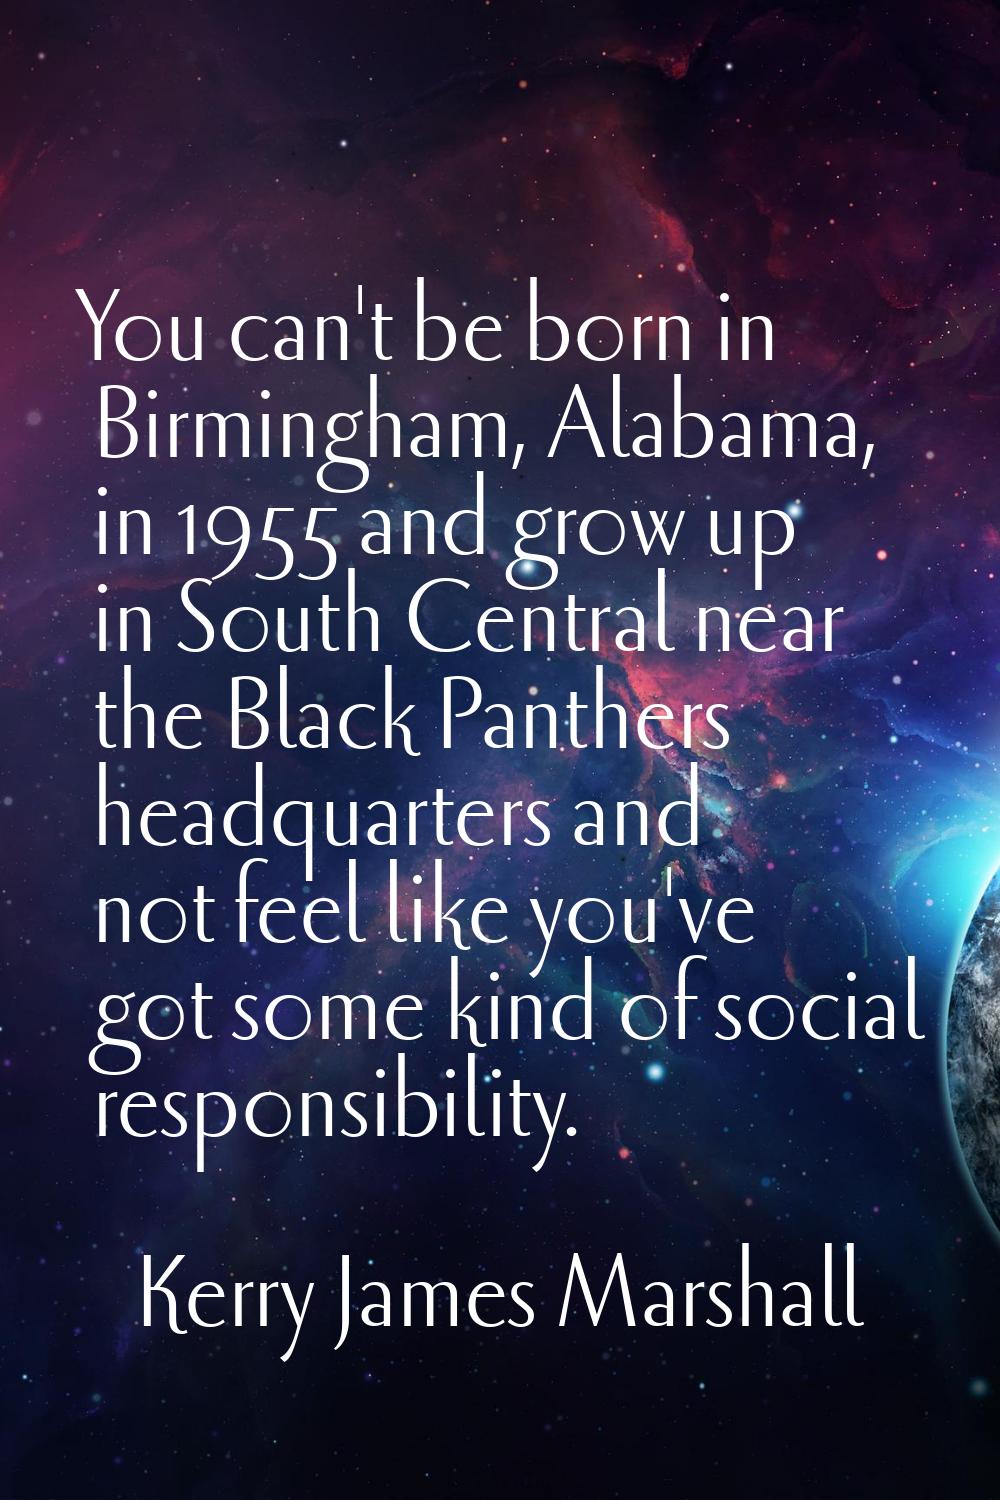 You can't be born in Birmingham, Alabama, in 1955 and grow up in South Central near the Black Panth